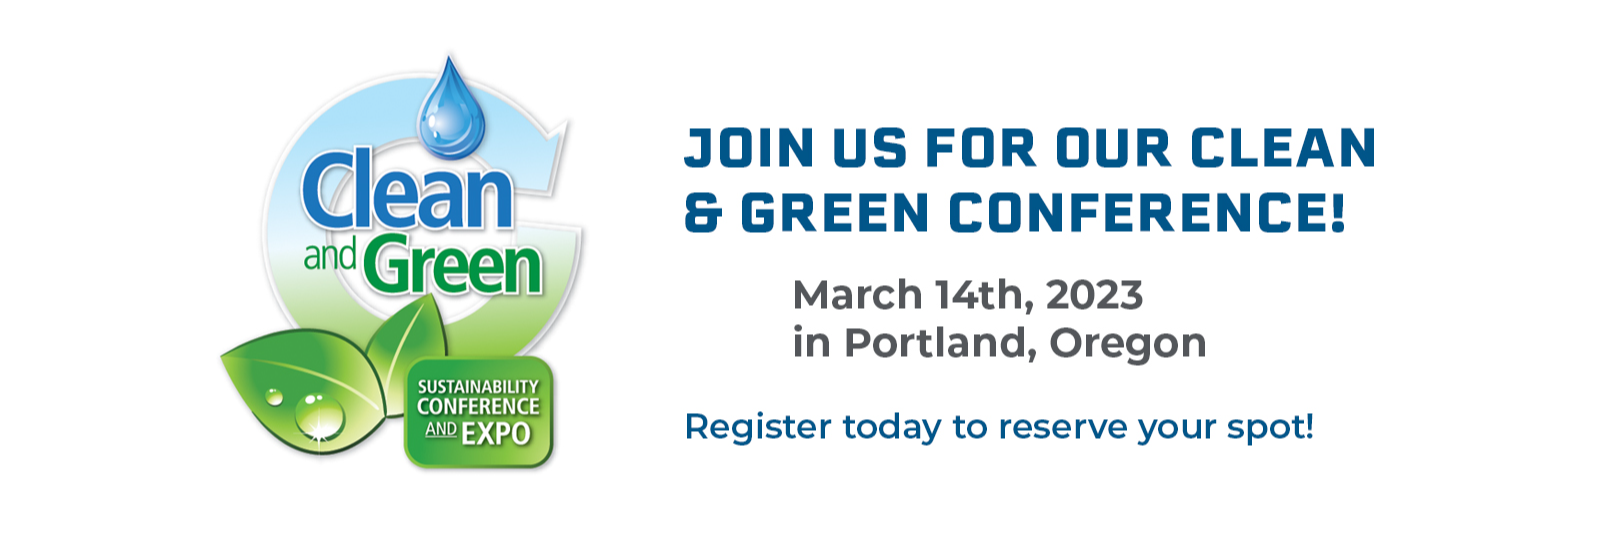 Clean & Green Sustainability Conference & Expo registration is open. 